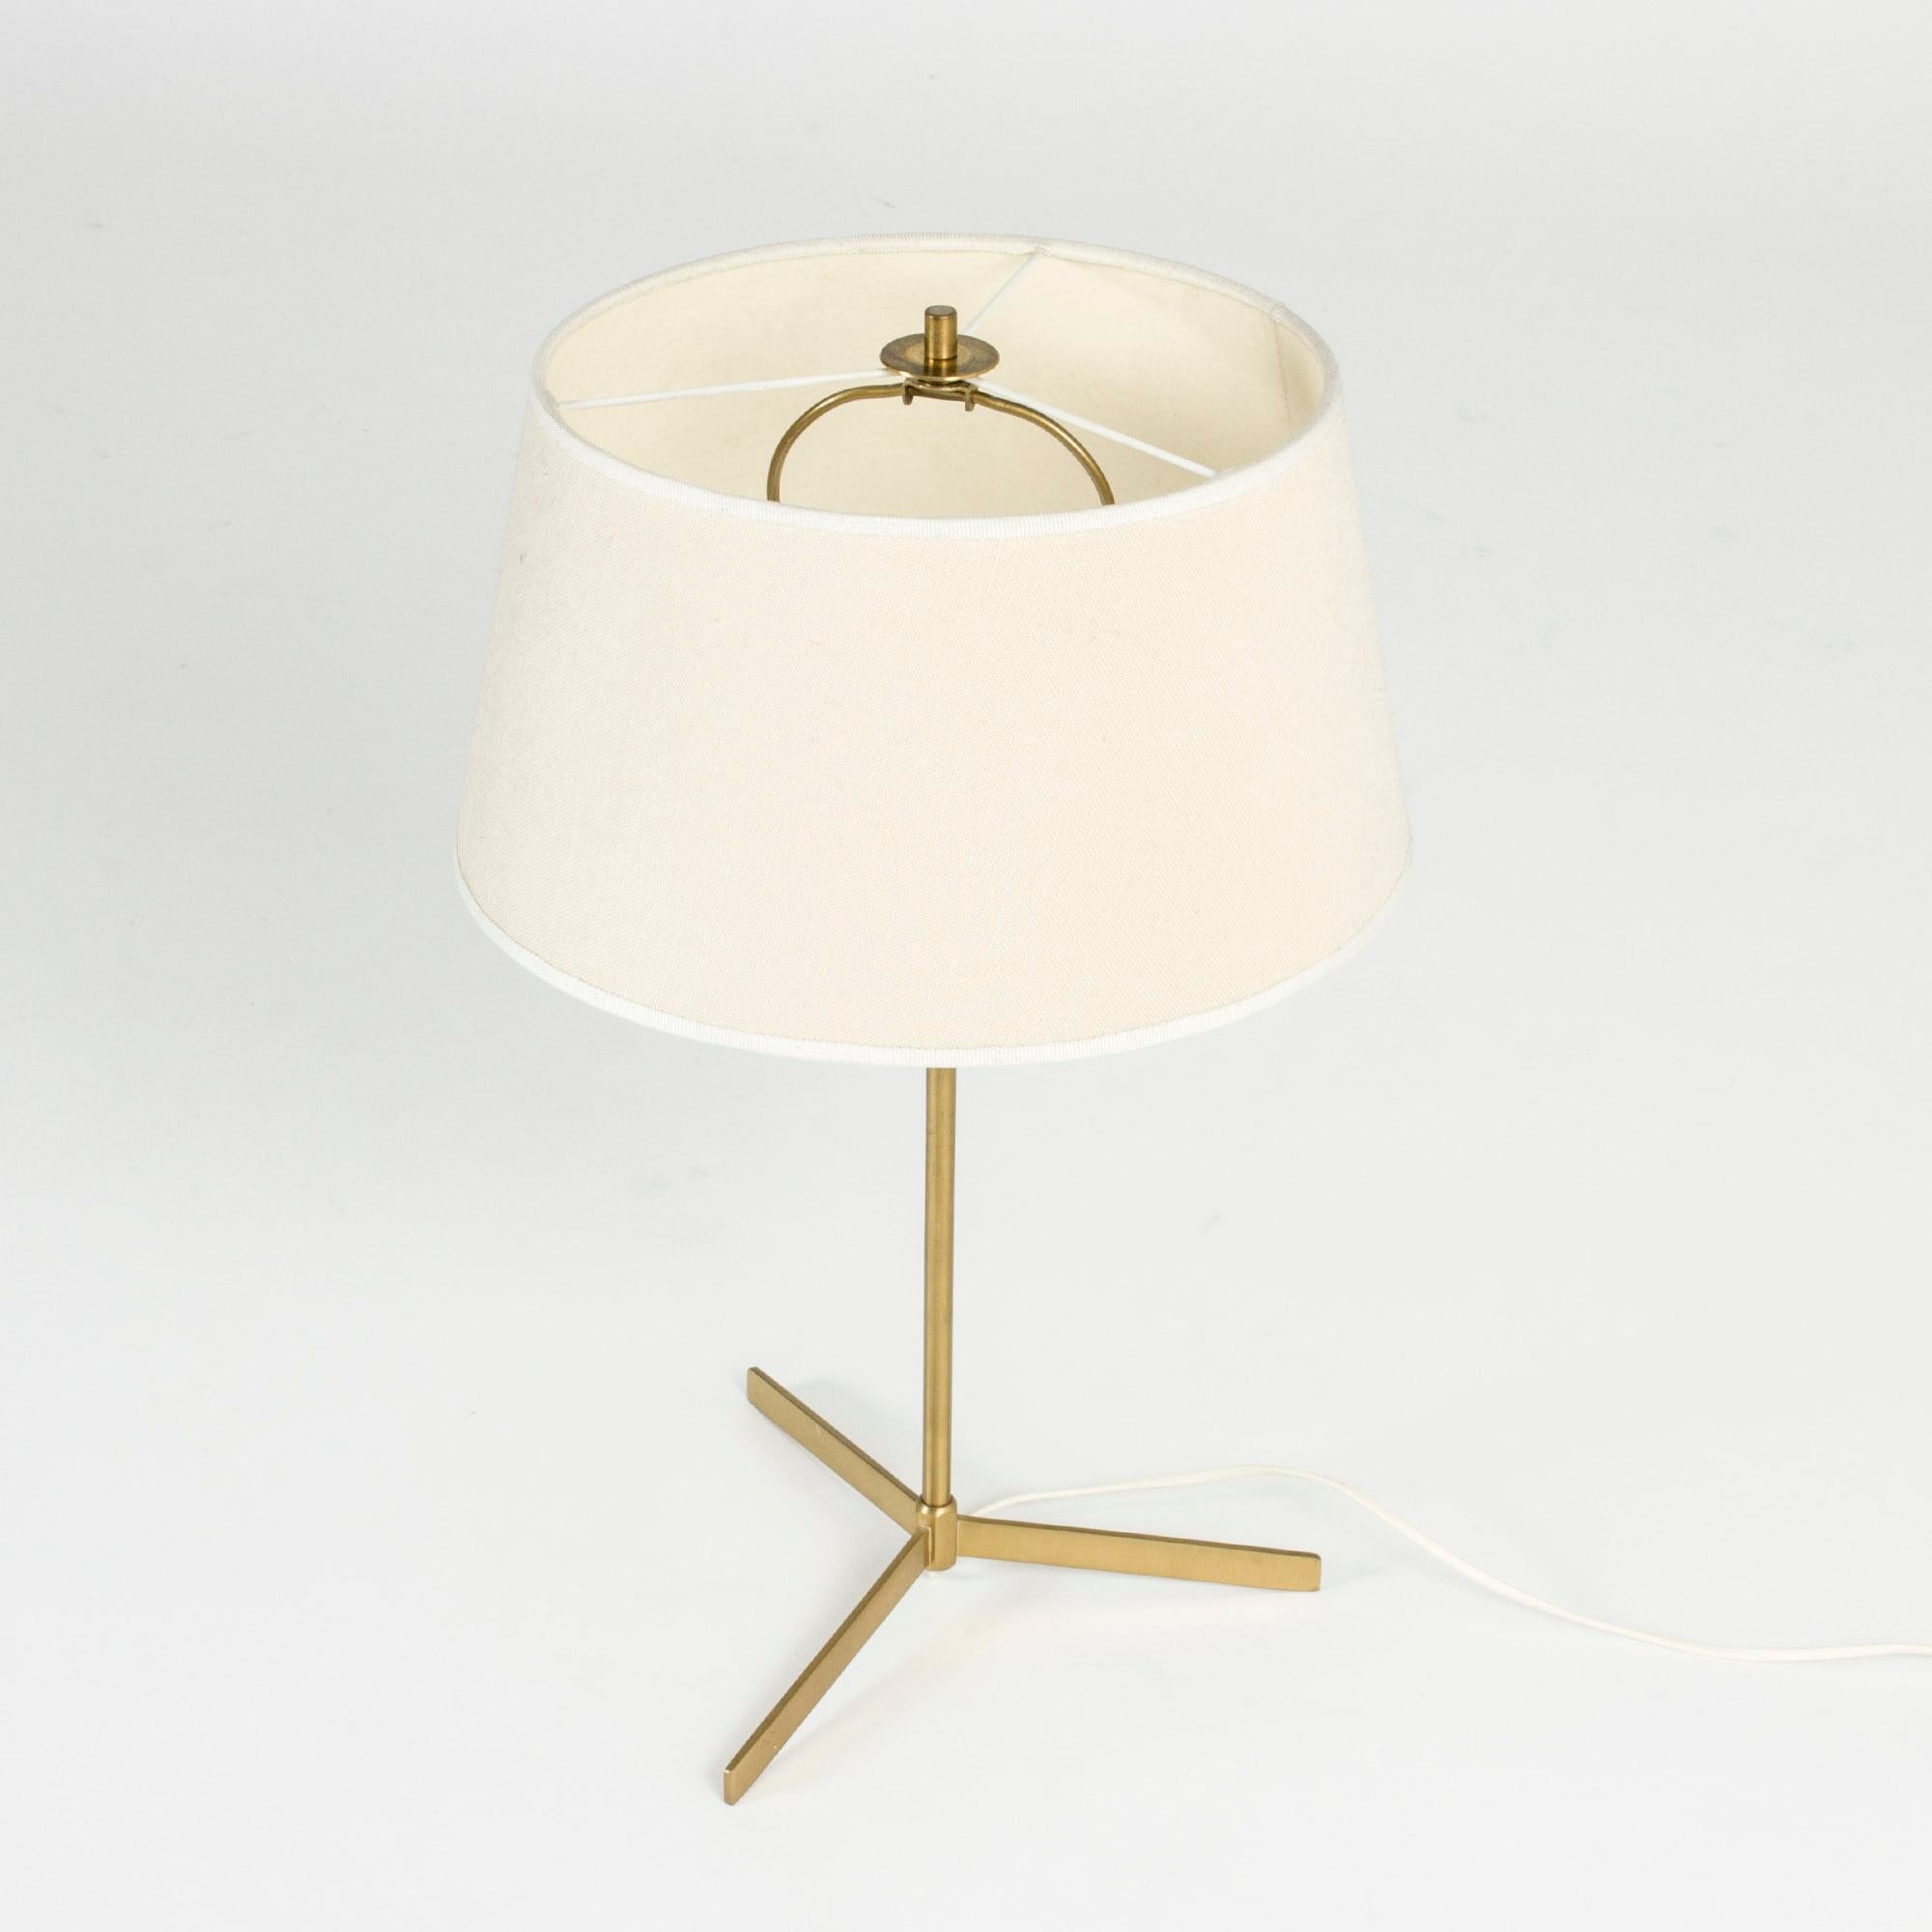 Table lamp from Bergboms with a lanky and angular brass base and cream colored textile shade. Nice proportions.